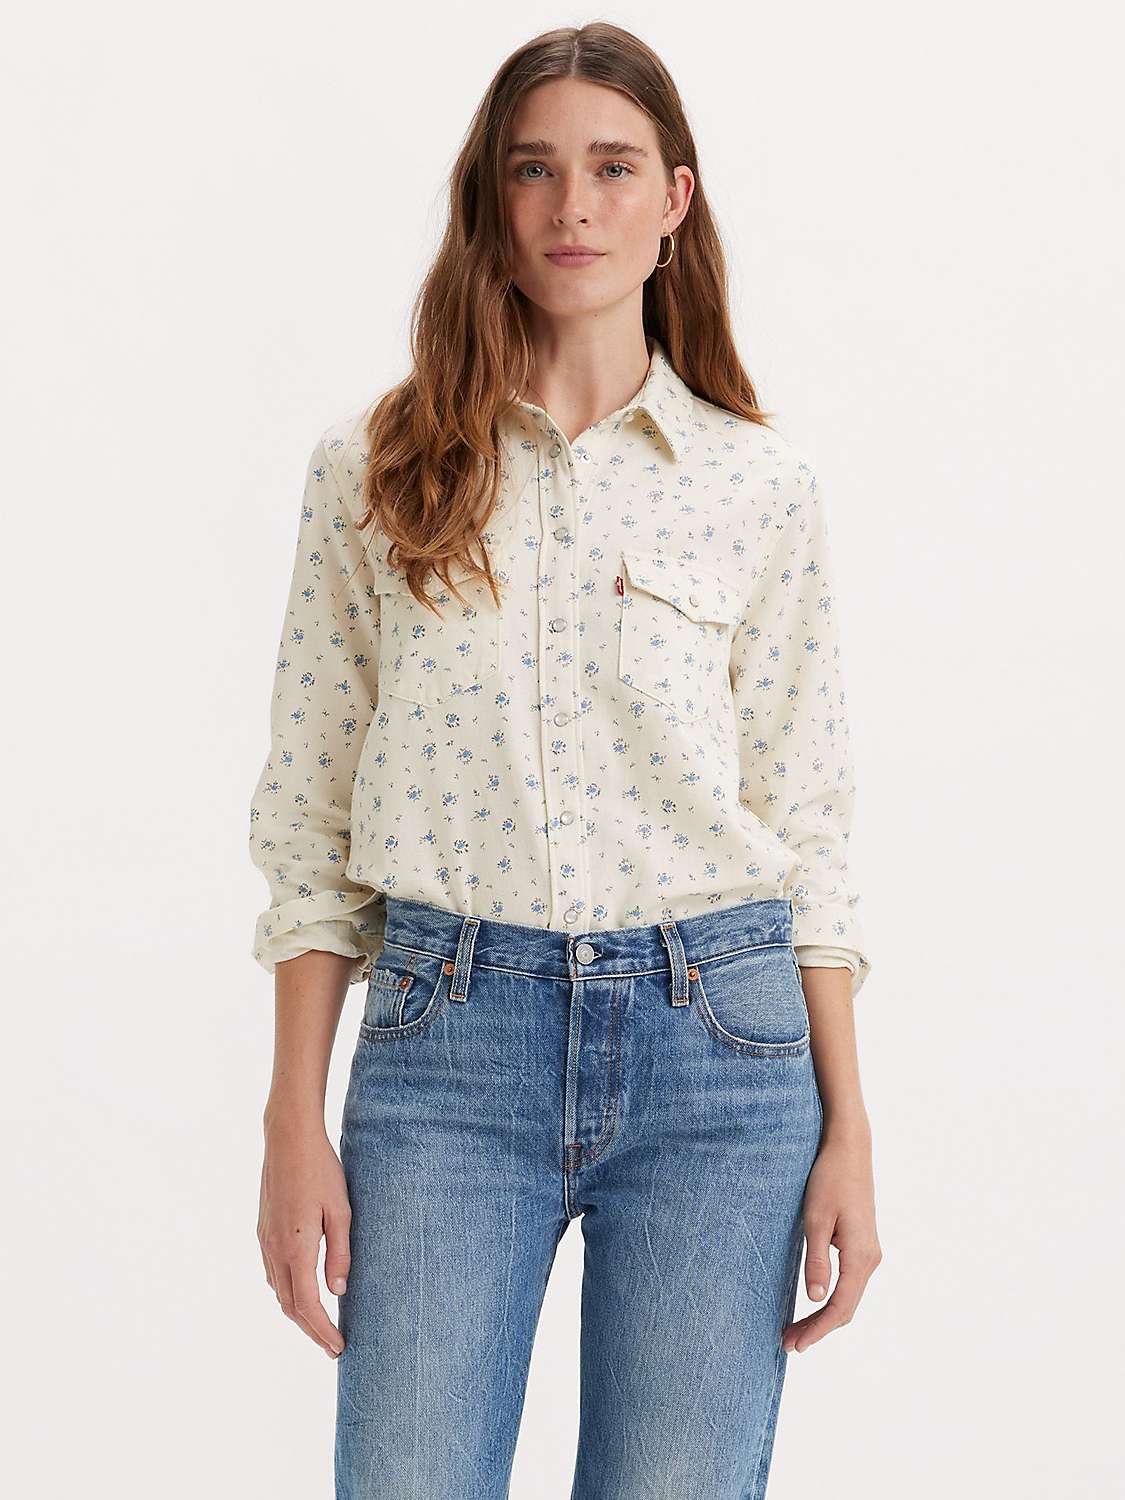 Buy Levi's Iconic Western Dolly Floral Shirt, Sun Cream Online at johnlewis.com